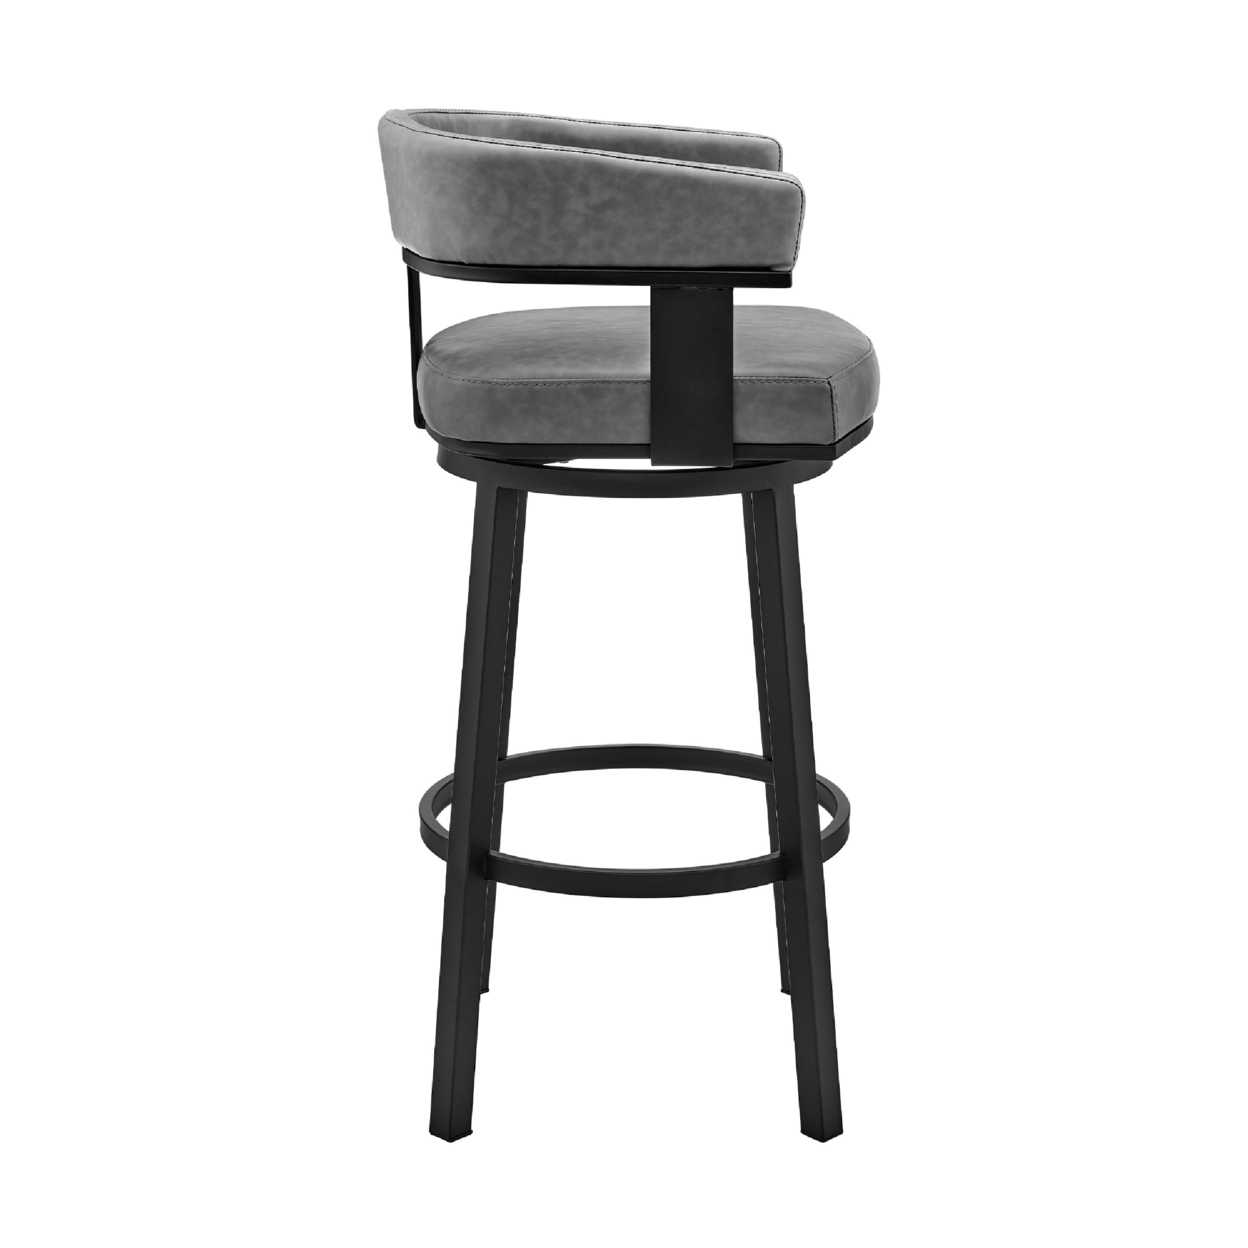 Swivel Counter Barstool With Curved Open Back And Metal Legs, Black And Gray- Saltoro Sherpi